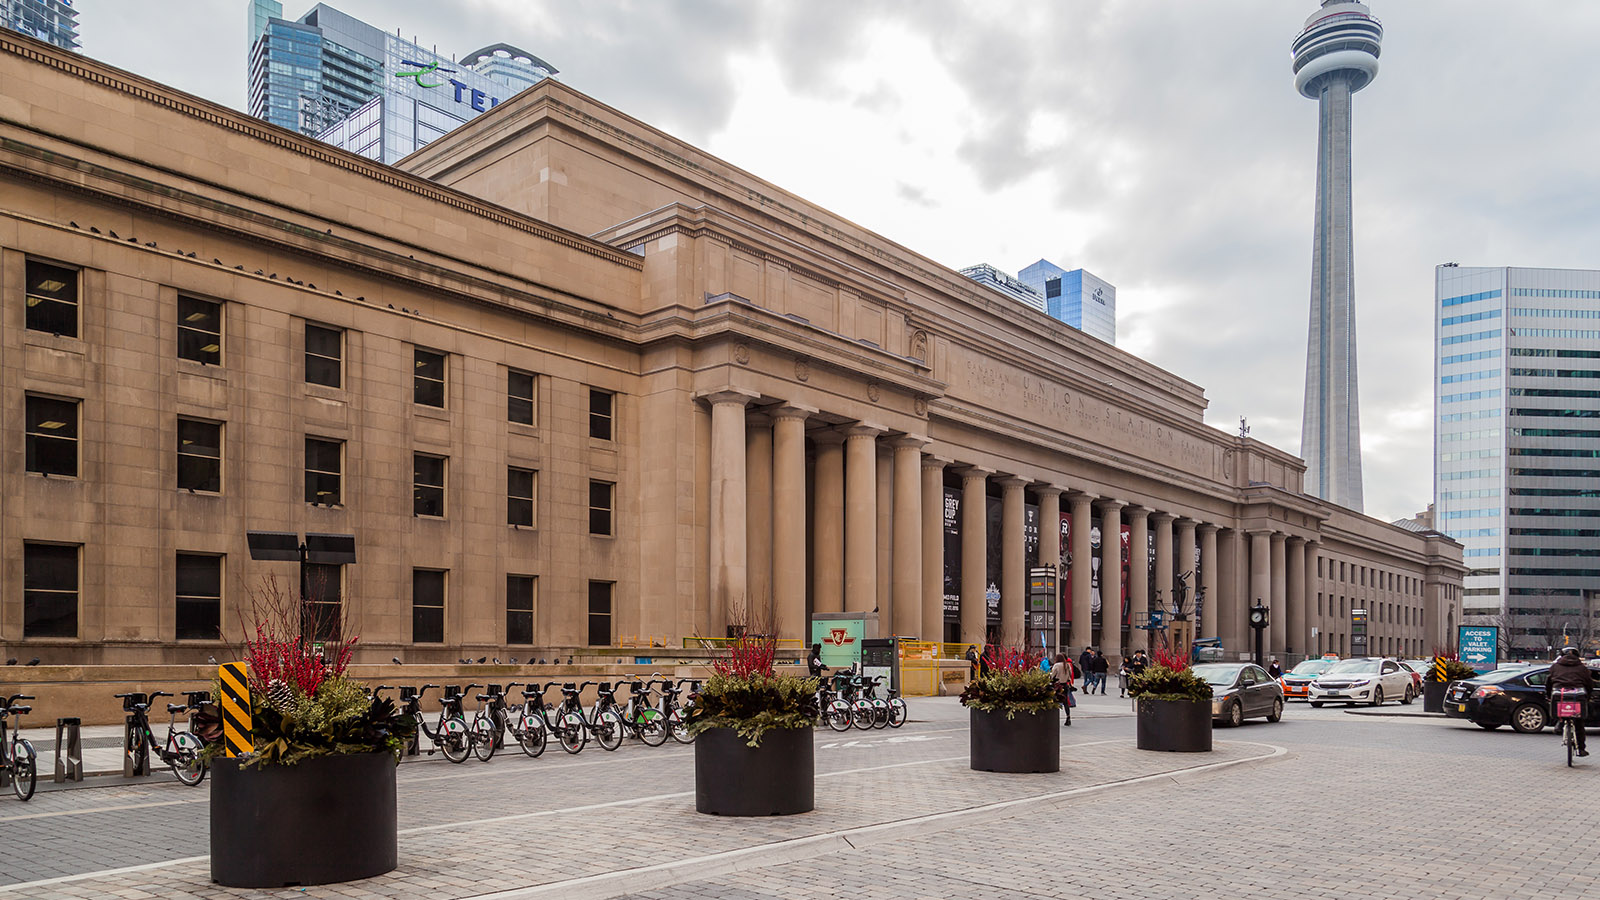 A grand limestone building with large doric columns and classical decorative elements.